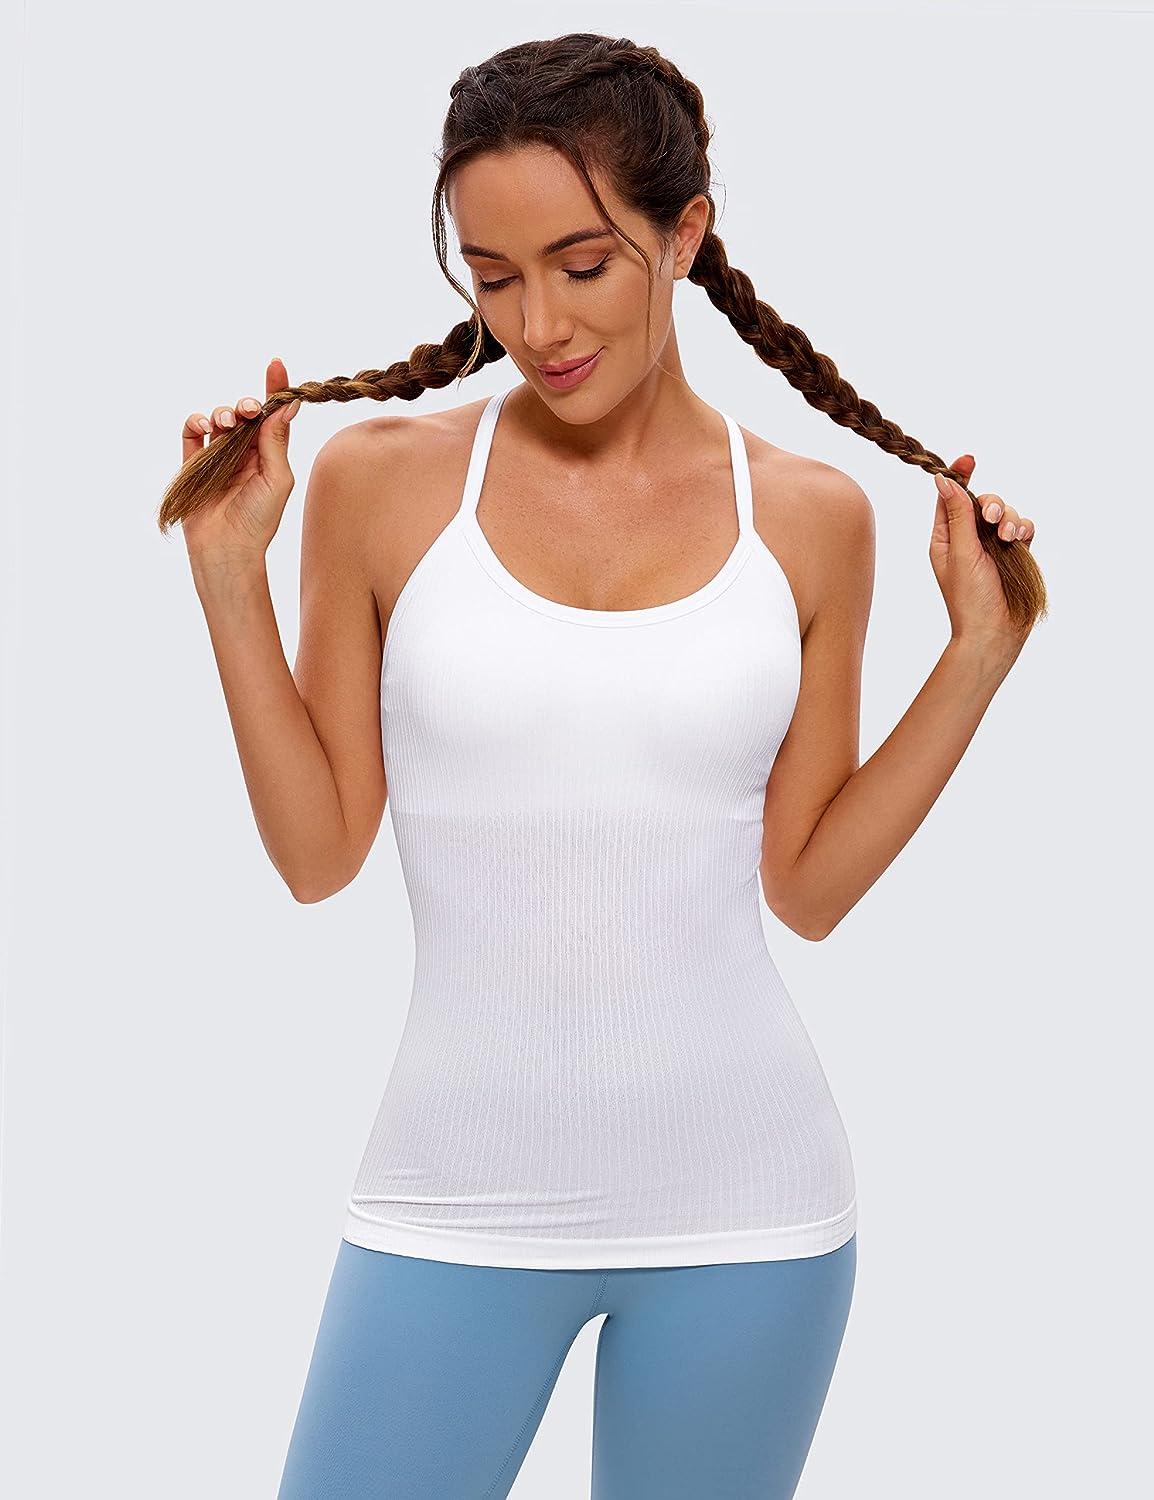 CRZ YOGA Seamless Workout Tank Tops for Women Racerback Athletic Camisole Sports  Shirts with Built in Bra Small White